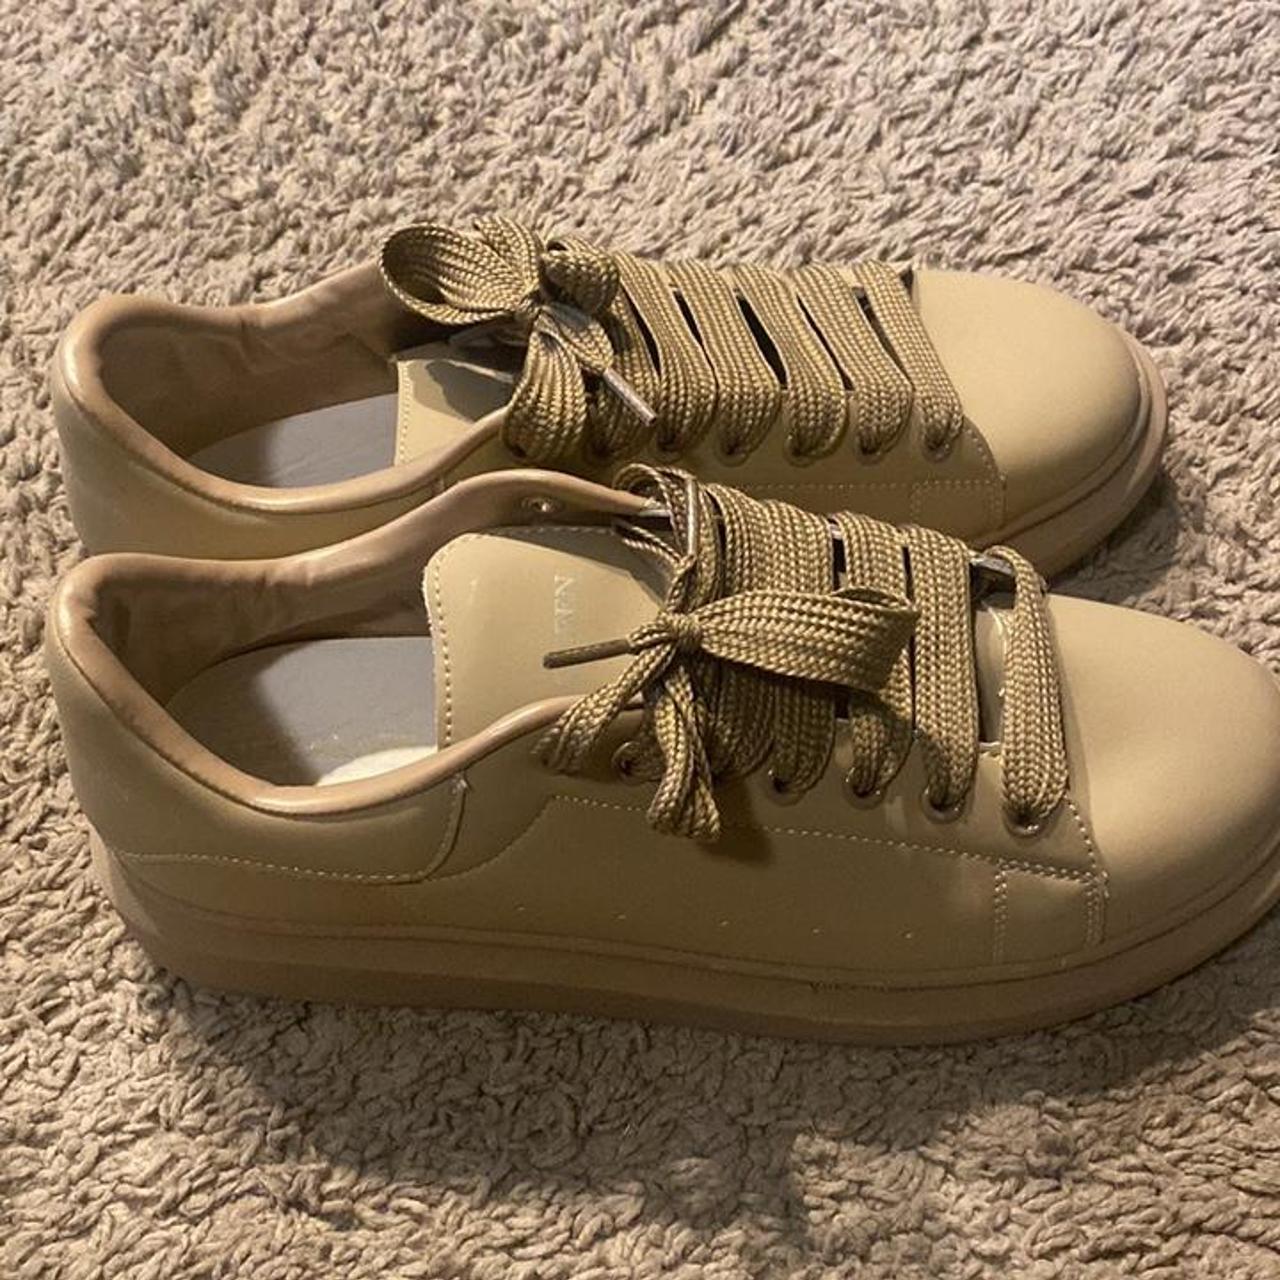 Tan colored Alexander Mcqueens, send offers, can fit... - Depop